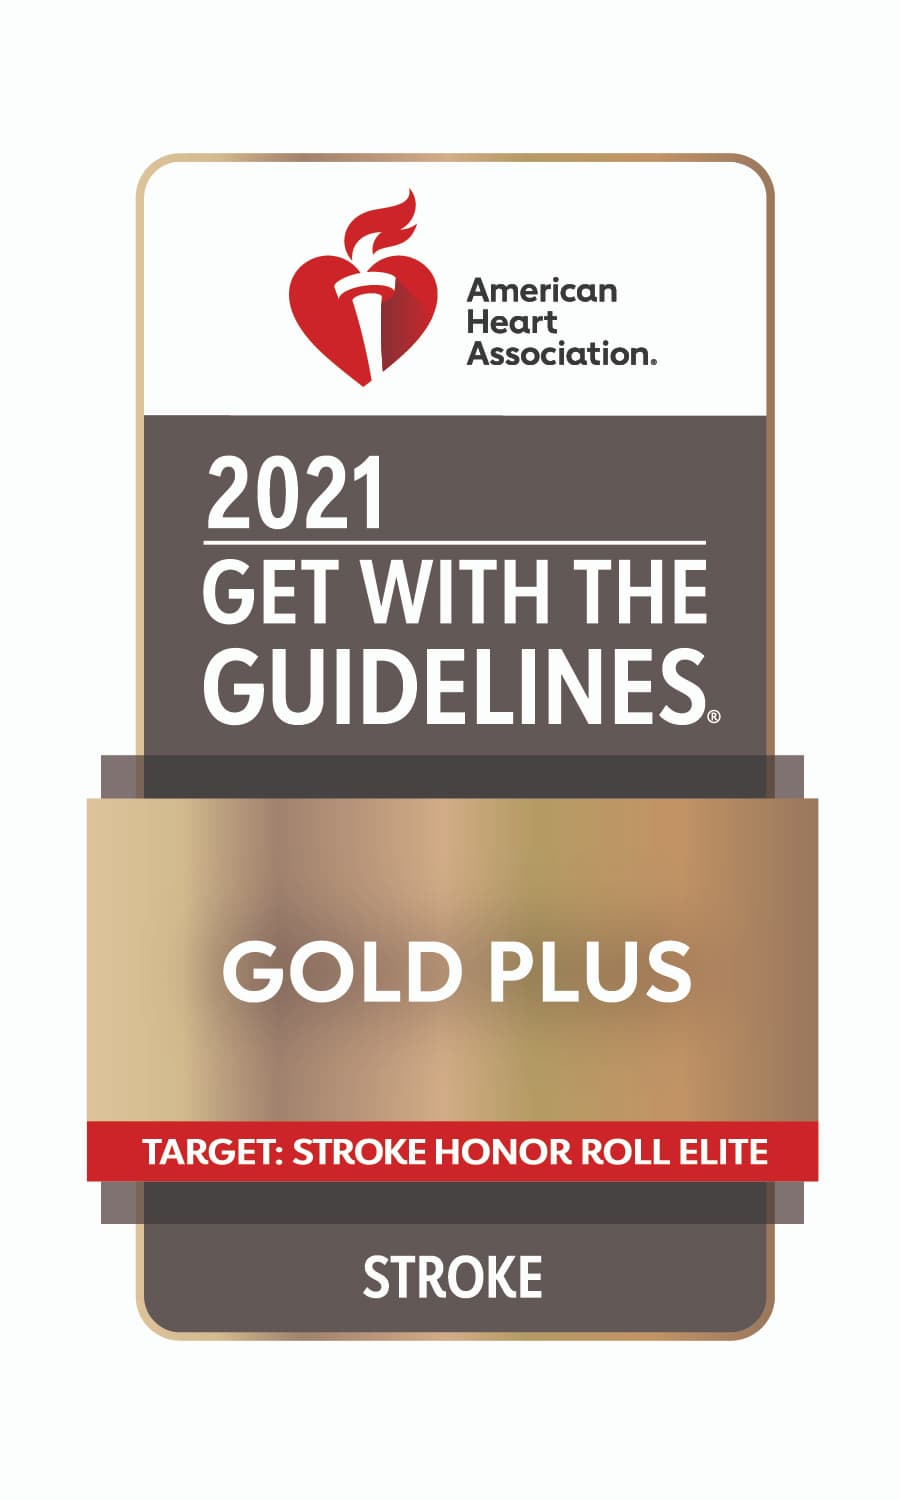 American Heart Association: 2021 Get with the Guidelines. Gold Plus. Target: Stroke Honor Roll Elite. Stroke Award.